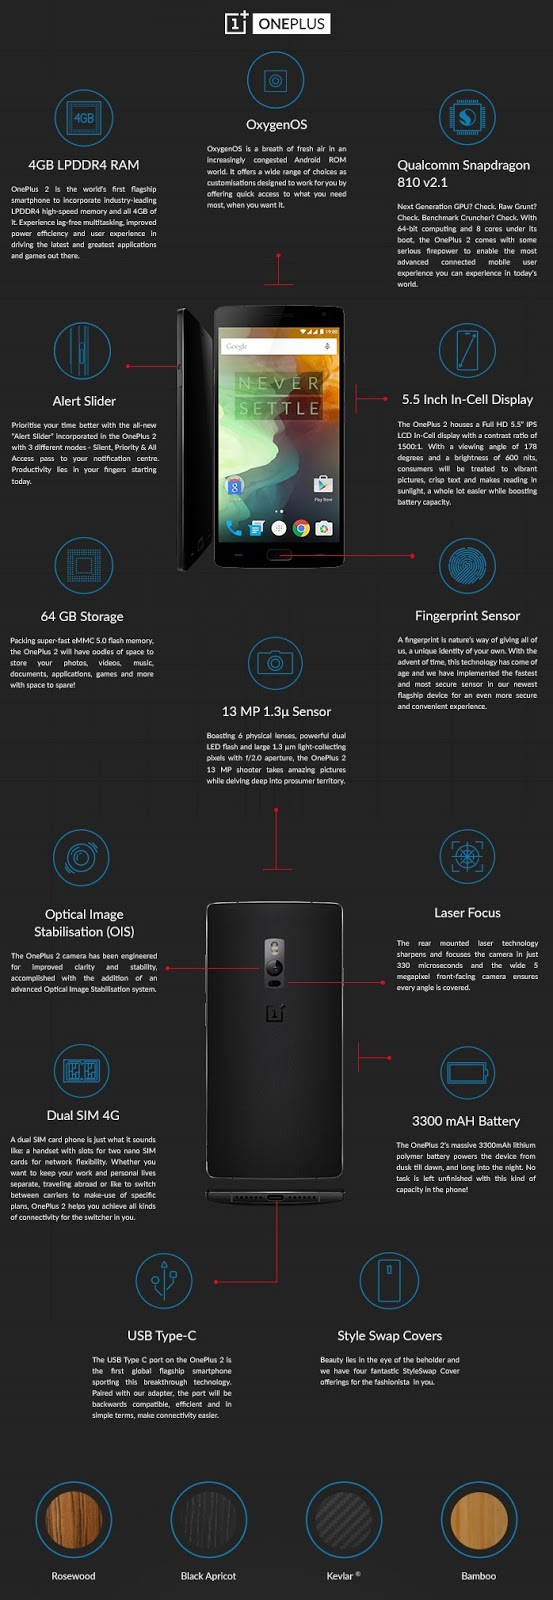 OnePlus-2-full-Specifications-list